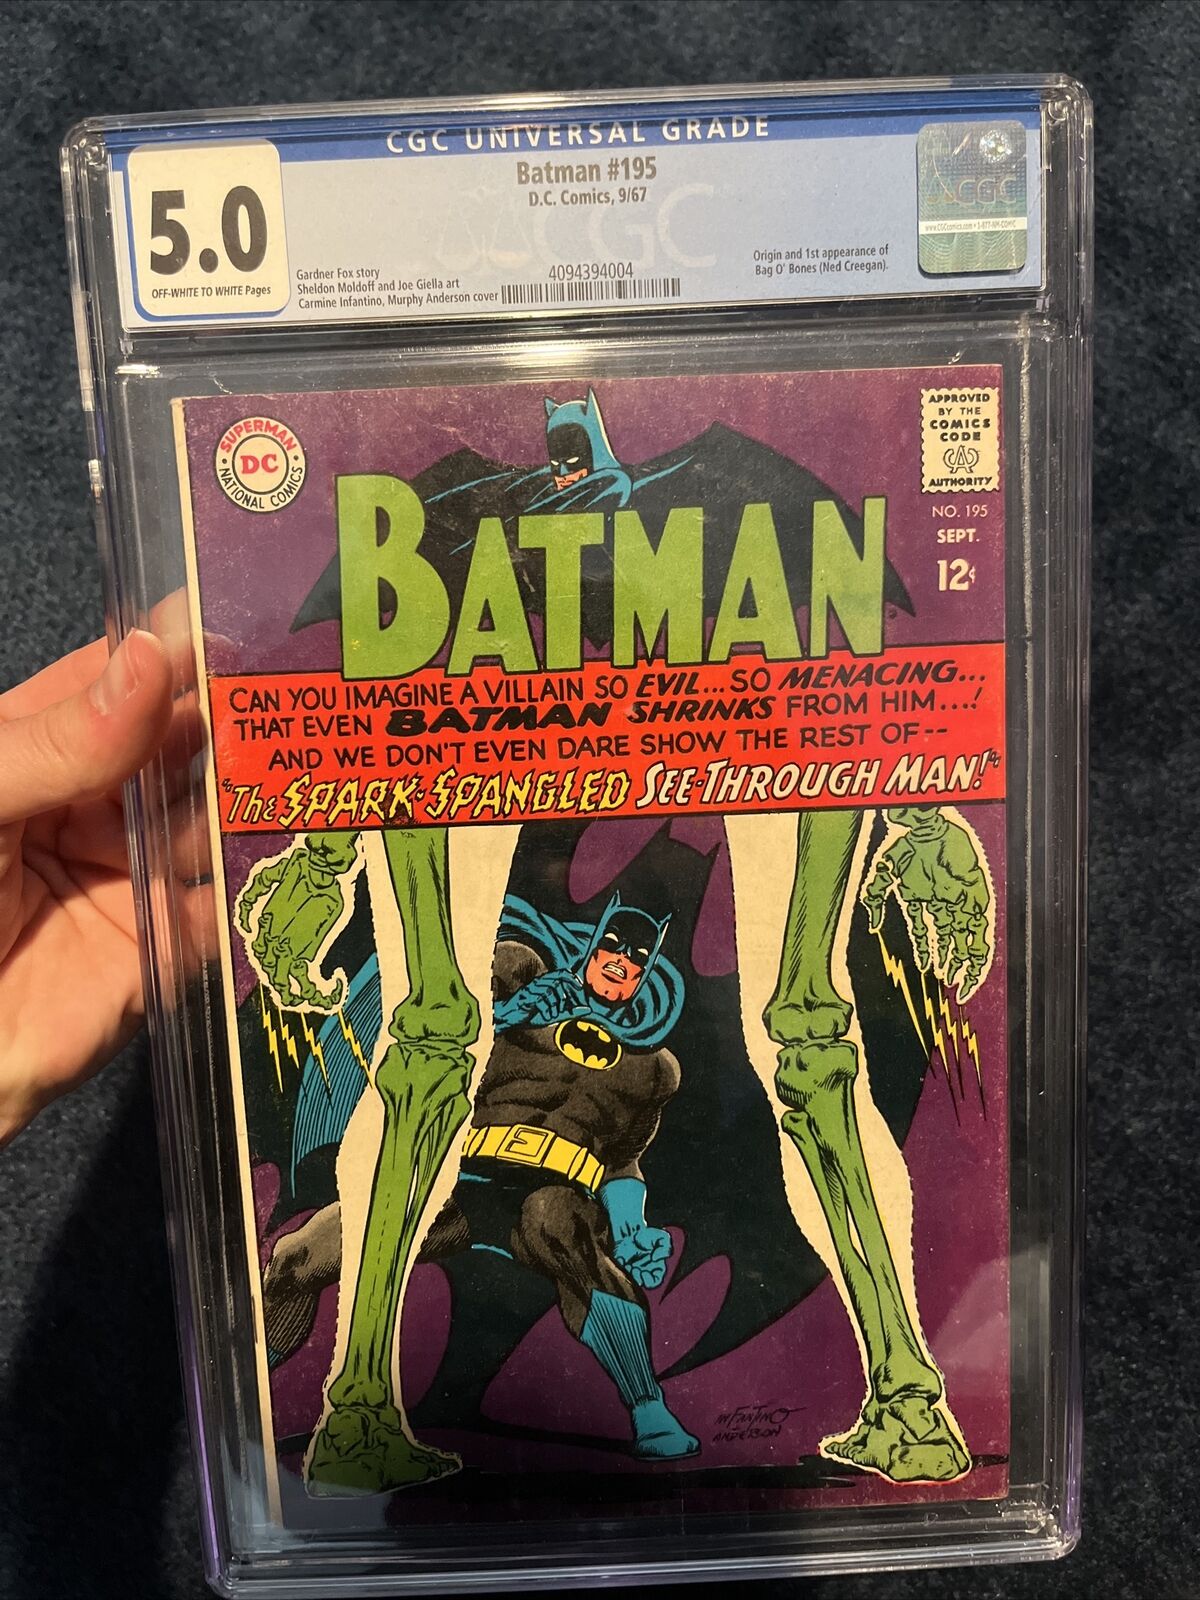 1967 *RARE* Batman CGC Graded Comic #195 OFF-WHITE to WHITE Pages